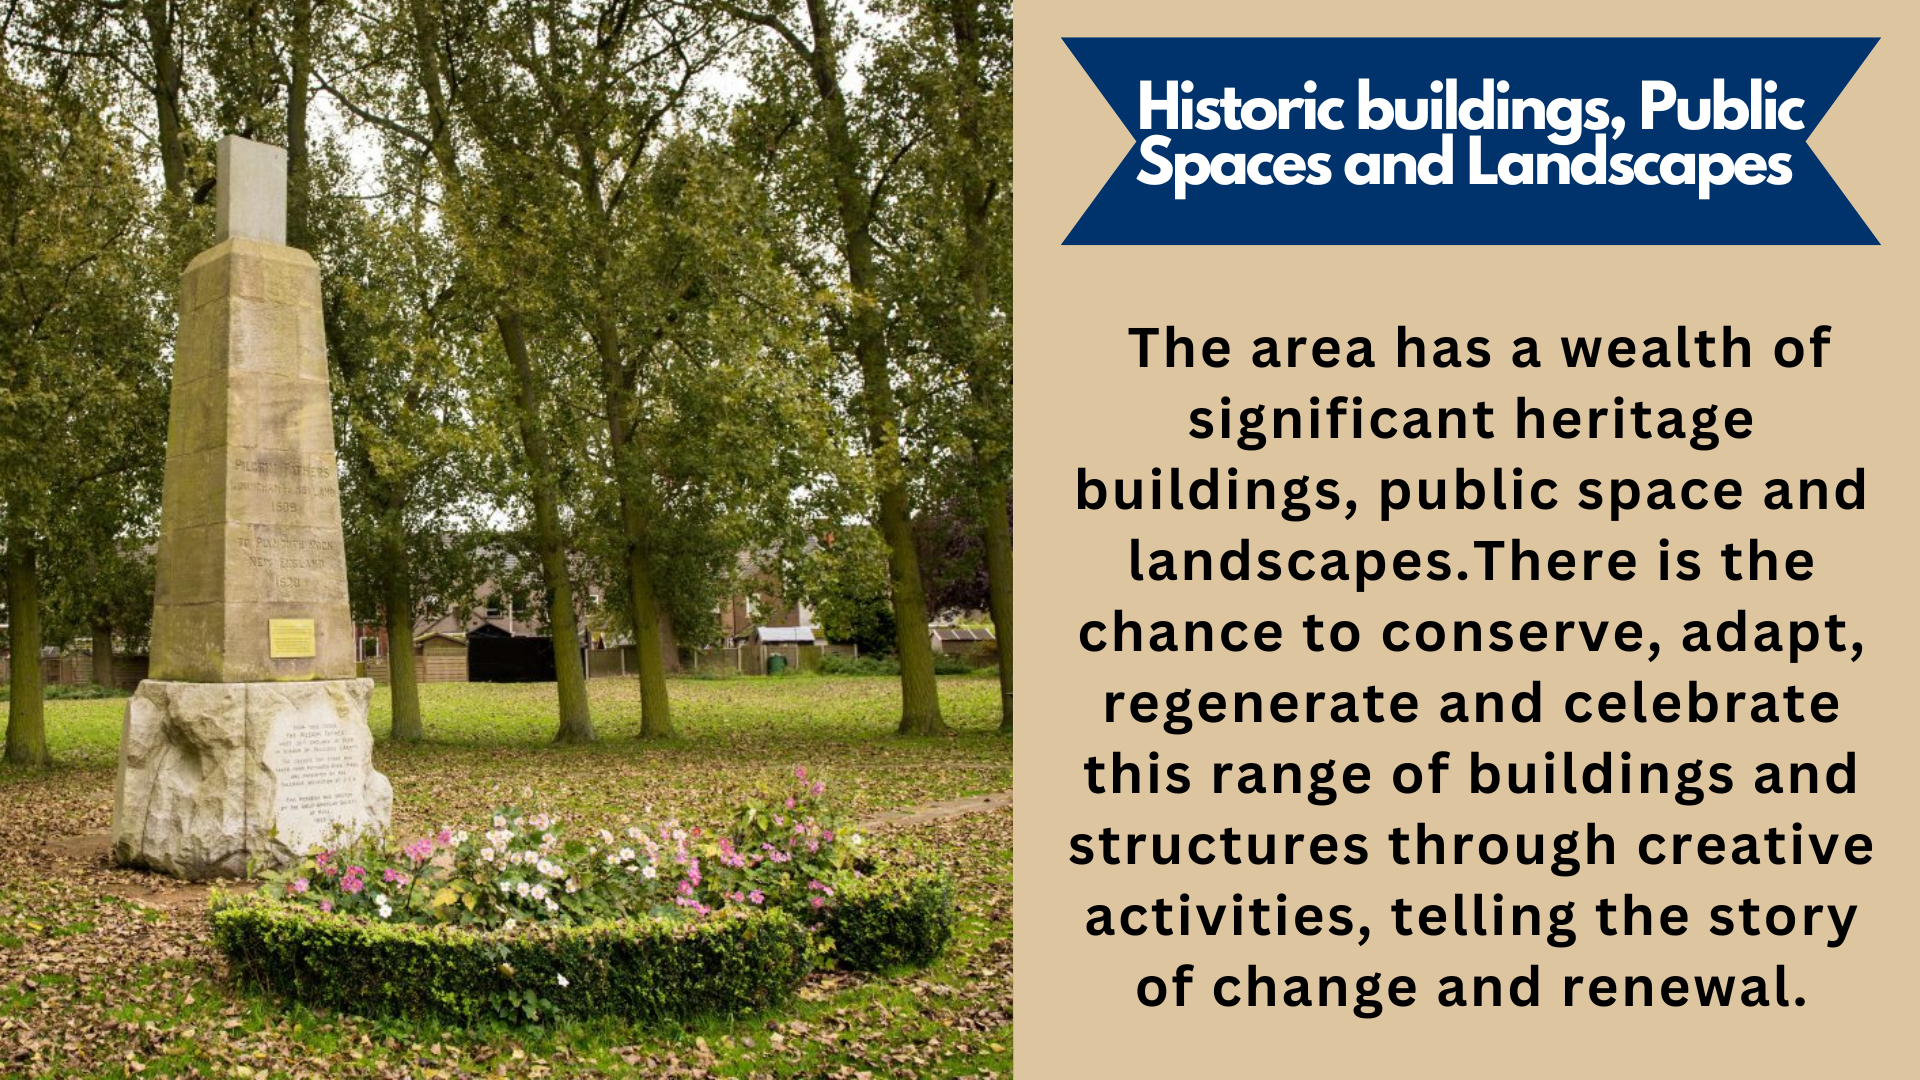 Historic buildings, Public Spaces and Landscapes. The area has a wealth of significant heritage buildings, public space and landscapes.There is the chance to conserve, adapt, regenerate and celebrate this range of buildings and structures through creative activities, telling the story of change and renewal.